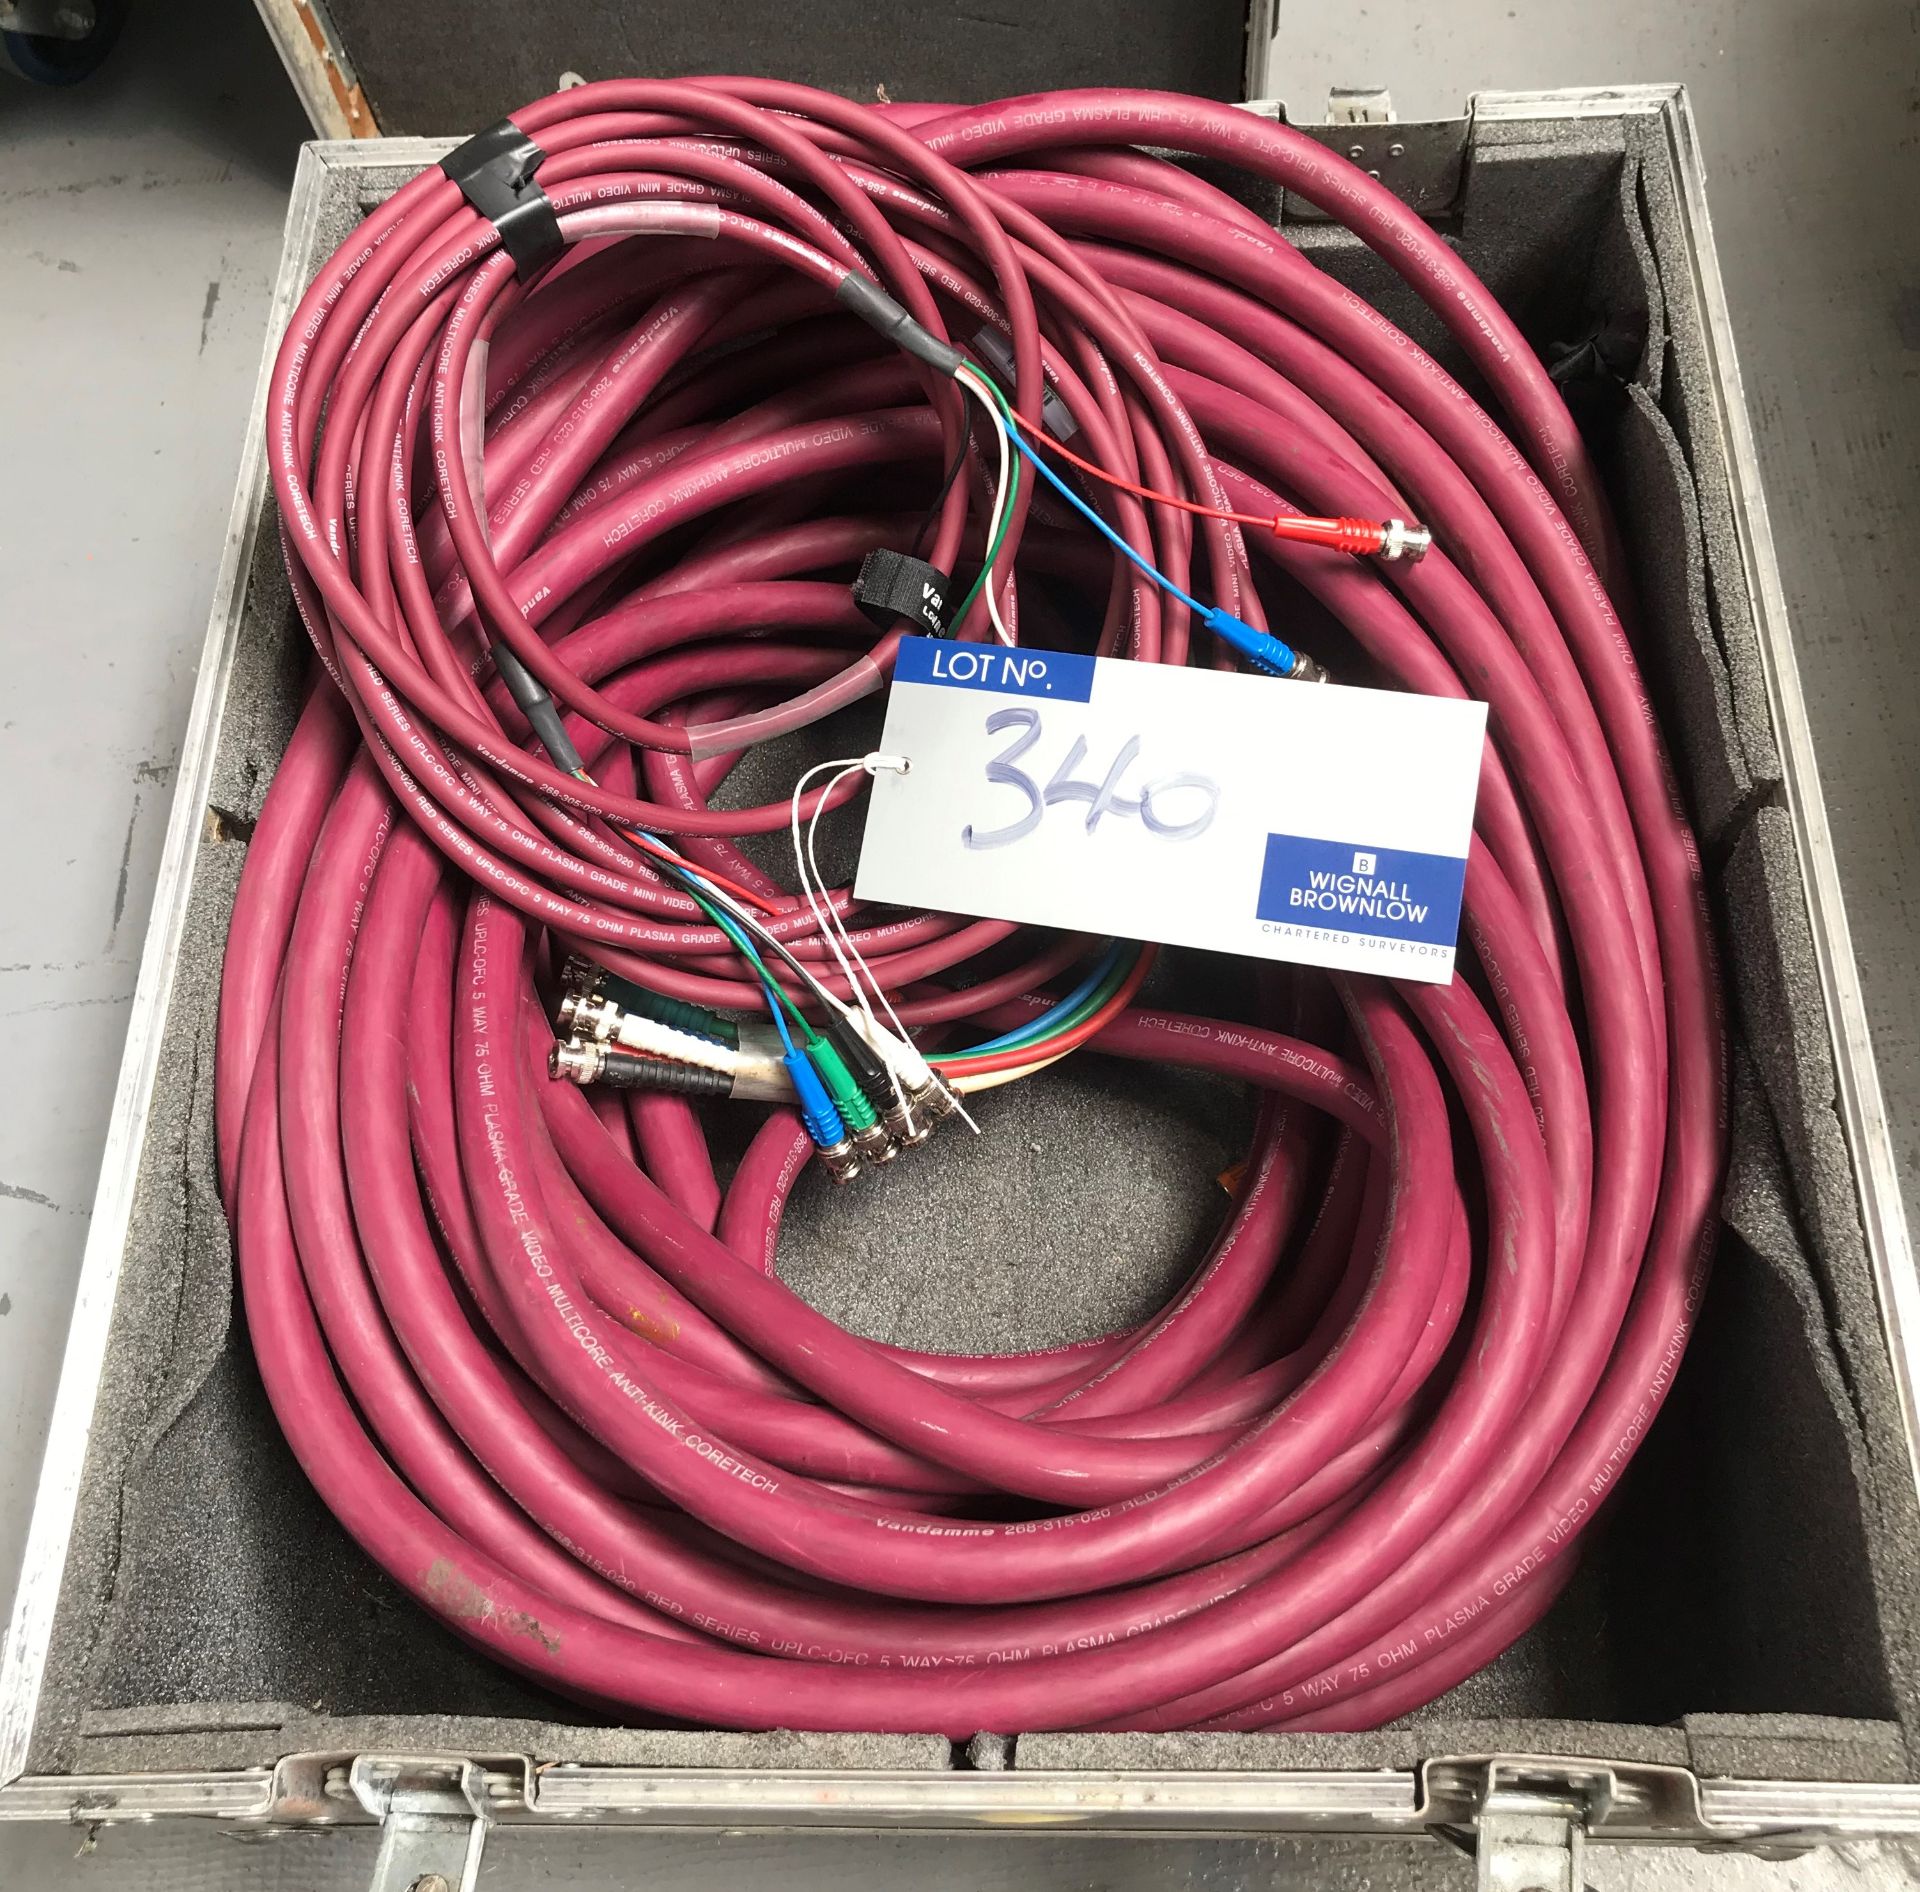 2 RGBHV Video Cables, 45m and 10m with mobile flight case (located at Unit 54 Westbrook Park,